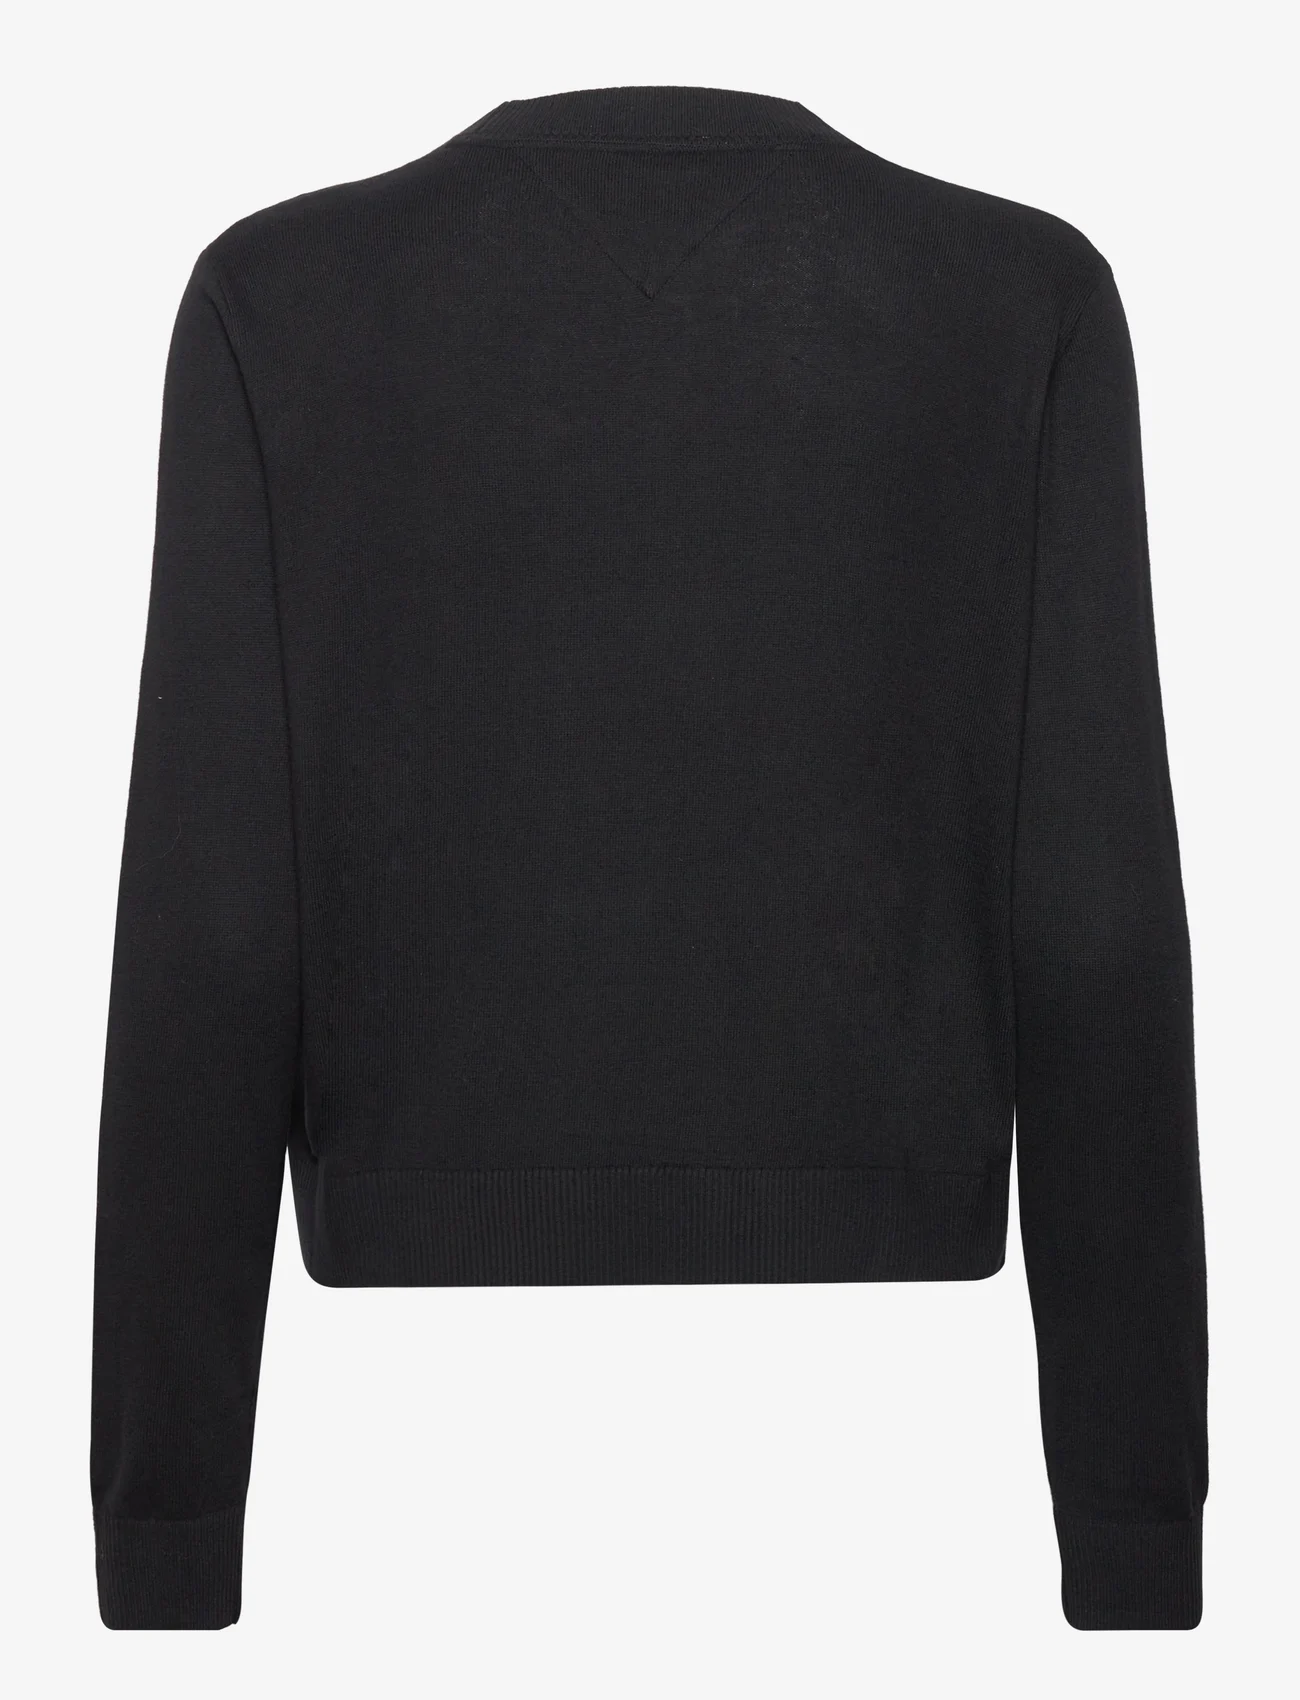 Tommy Jeans - TJW ESSENTIAL CREW NECK SWEATER - sweaters - black - 1